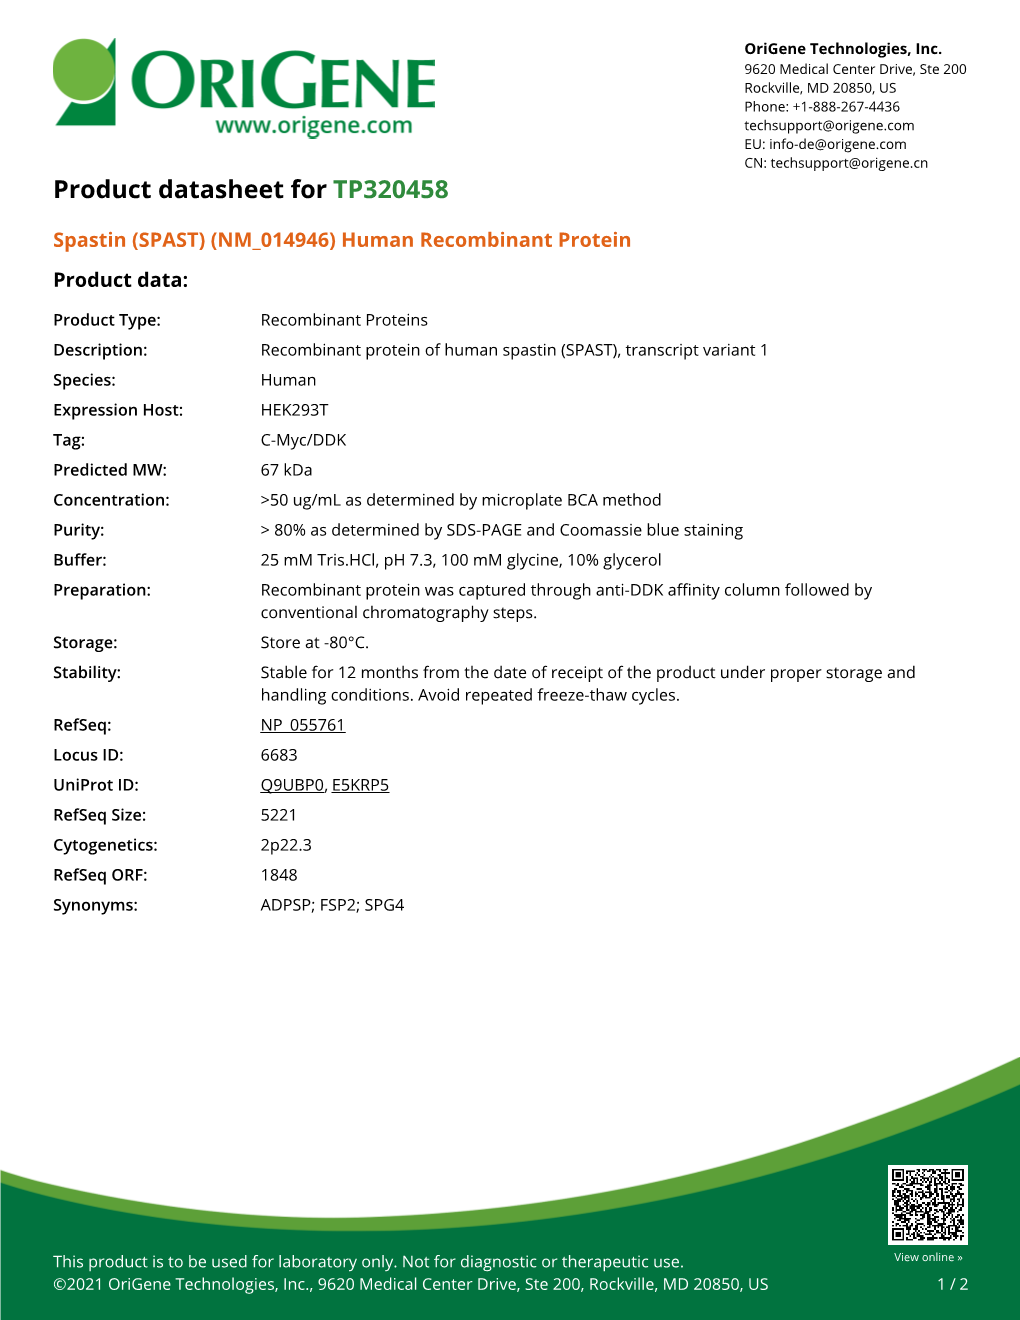 Spastin (SPAST) (NM 014946) Human Recombinant Protein Product Data